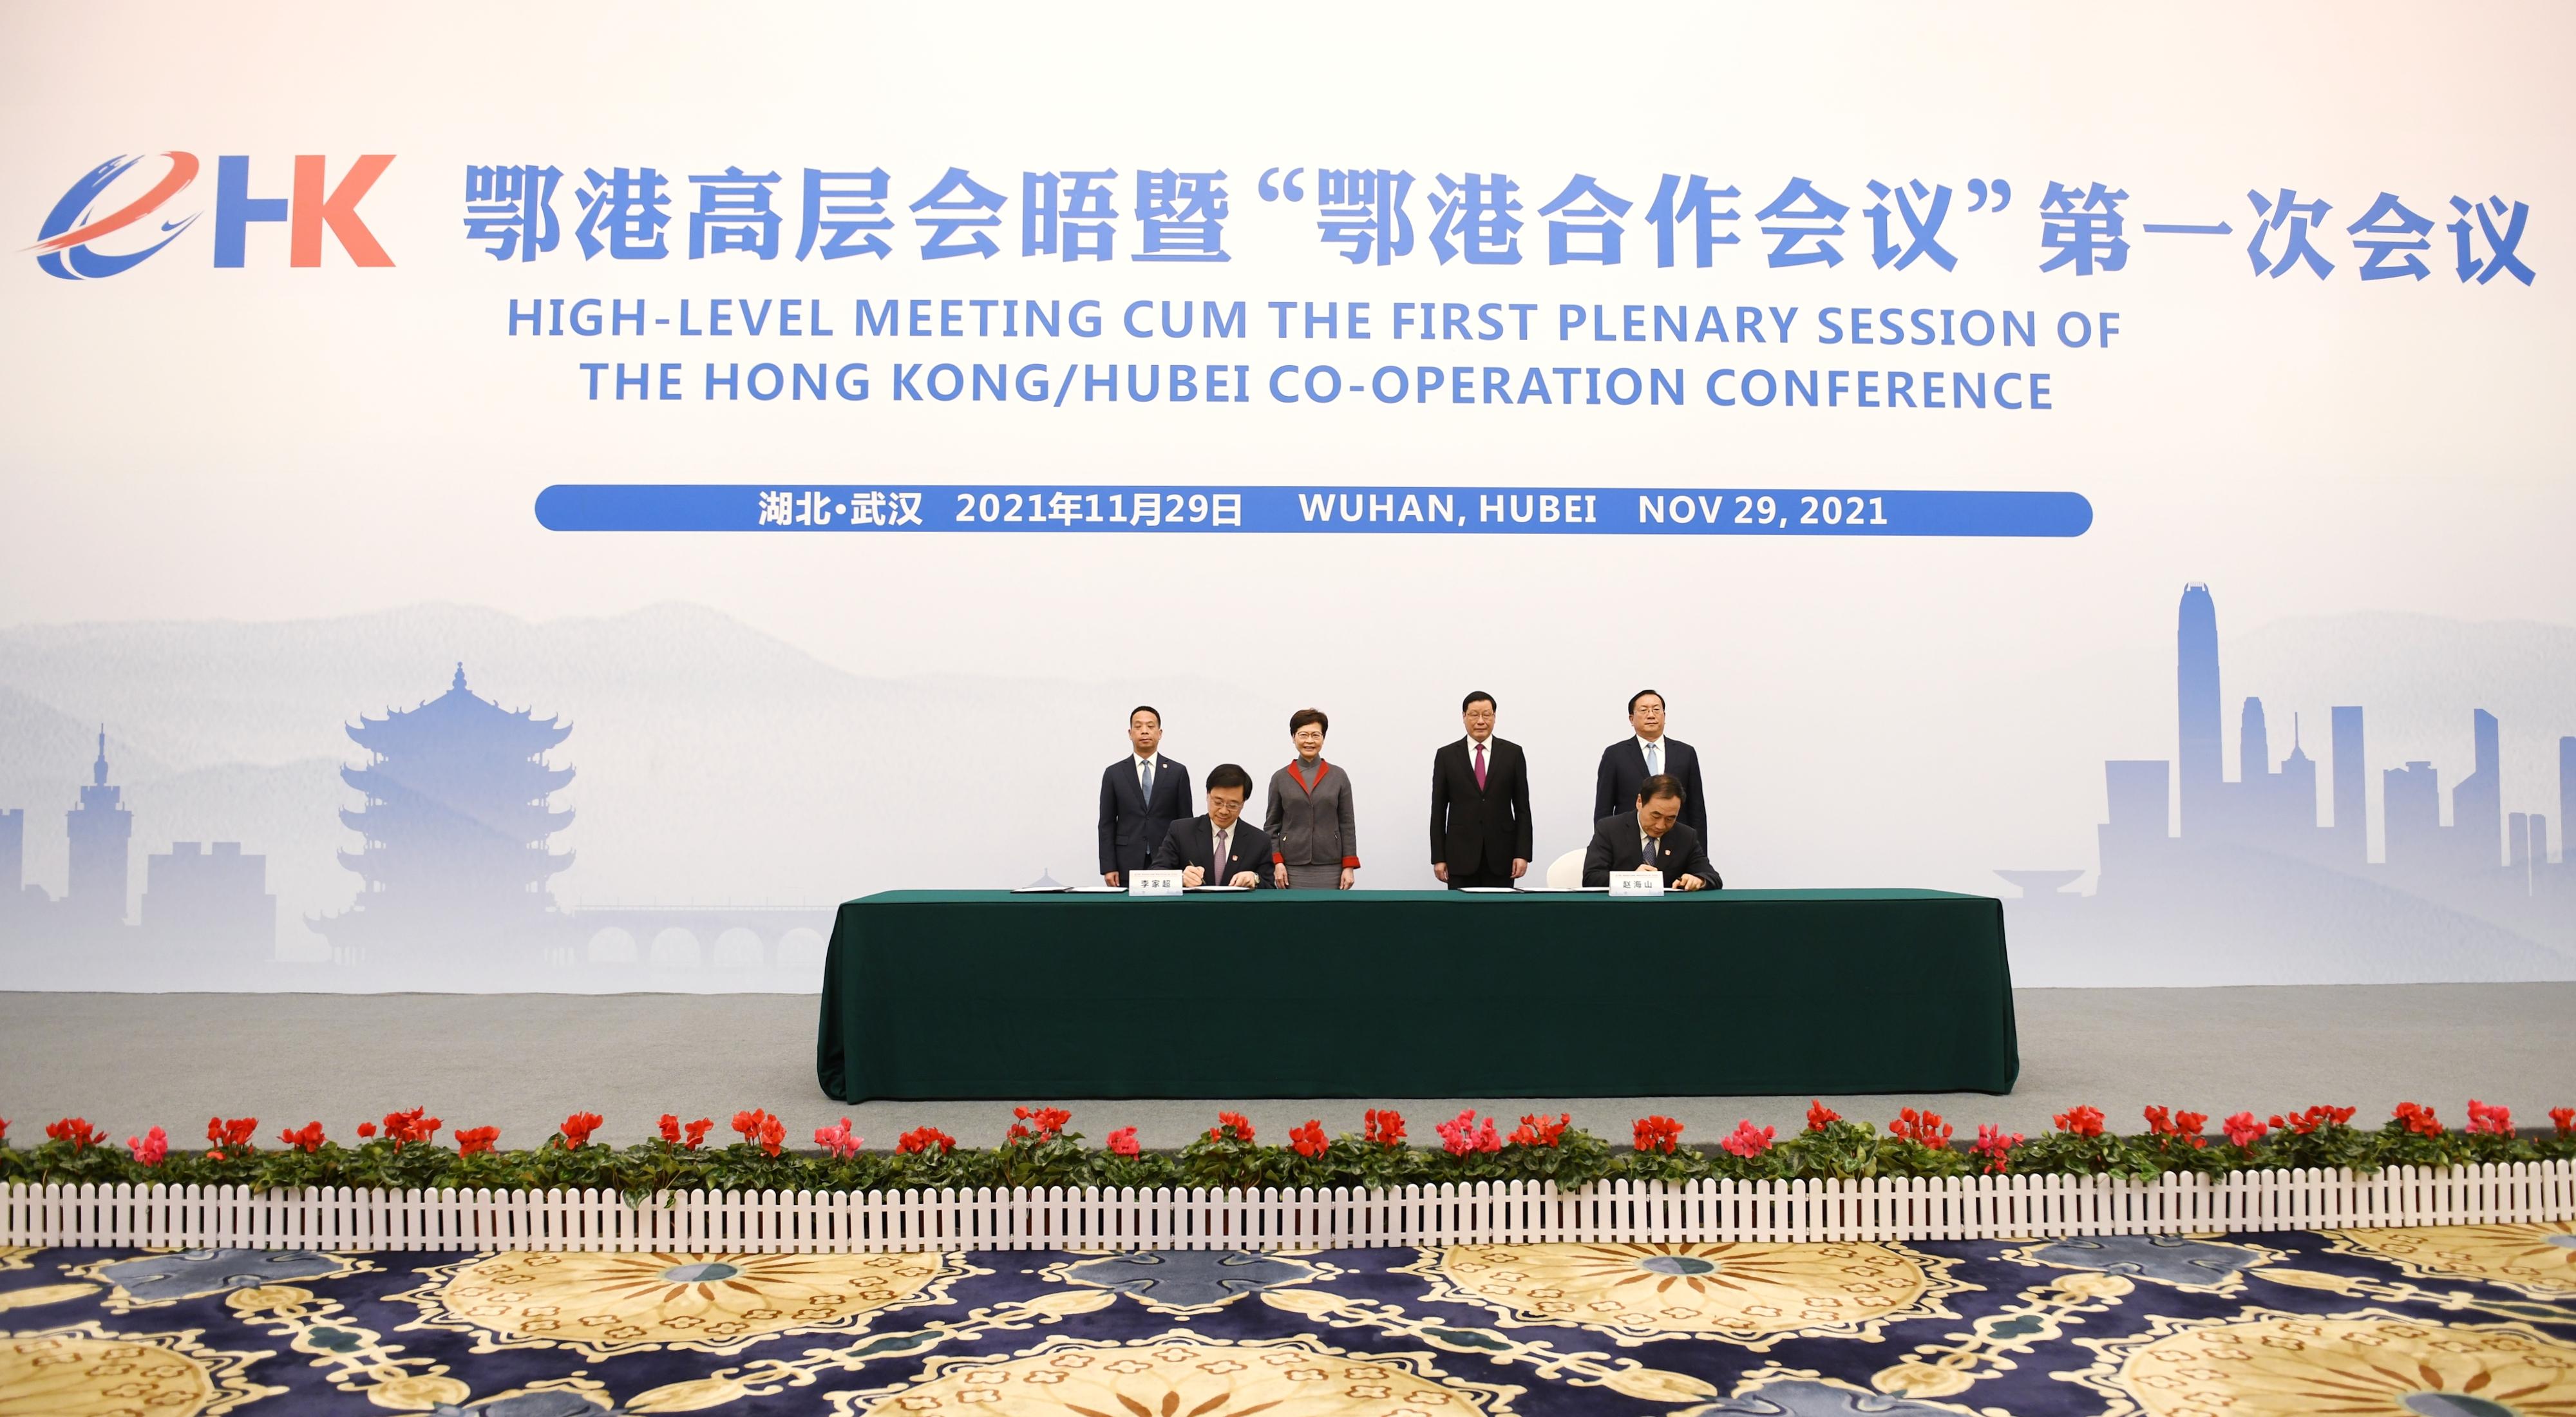 The Chief Executive, Mrs Carrie Lam, today (November 29) led a delegation of the Hong Kong Special Administrative Region Government to attend the High-Level Meeting cum First Plenary Session of the Hong Kong/Hubei Co-operation Conference. Photo shows (back row, from left) Deputy Director of the Hong Kong and Macao Affairs Office of the State Council Mr Huang Liuquan; Mrs Lam; the Secretary of the CPC Hubei Provincial Committee, Mr Ying Yong; and the Governor of Hubei Province, Mr Wang Zhonglin, witnessing the signing of an agreement on the Hong Kong/Hubei Co-operation Conference Mechanism the Co-operation Memorandum of the High-Level Meeting cum First Plenary Session of the Hong Kong/Hubei Co-operation Conference by the Chief Secretary for Administration, Mr John Lee (front row, left) and Vice Governor of Hubei Province Mr Zhao Haishan (front row, right).